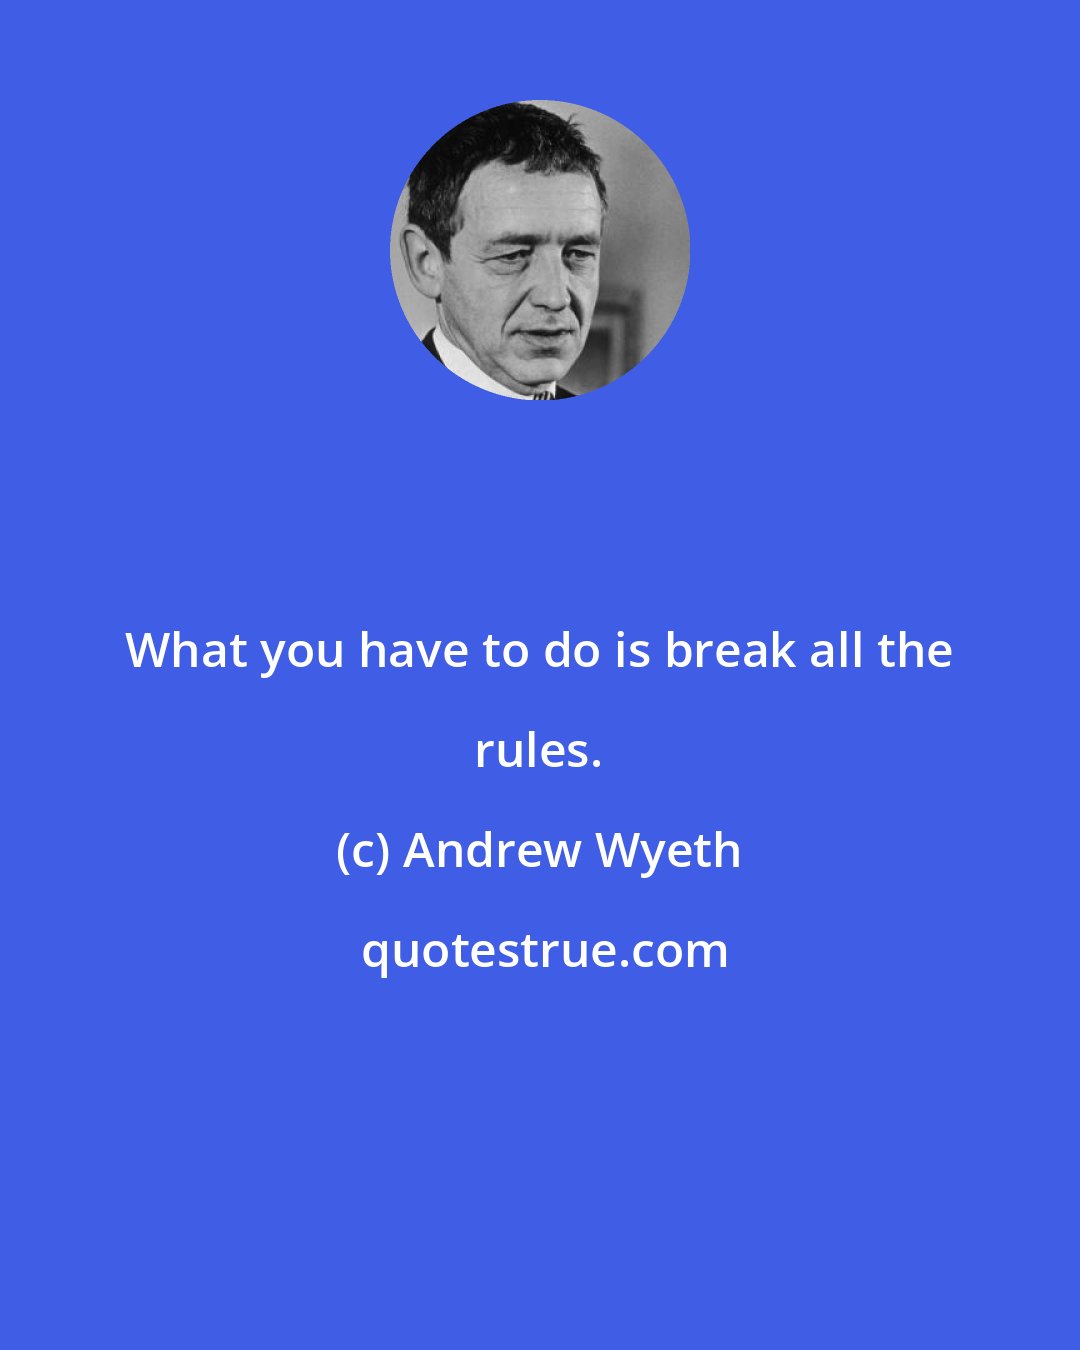 Andrew Wyeth: What you have to do is break all the rules.